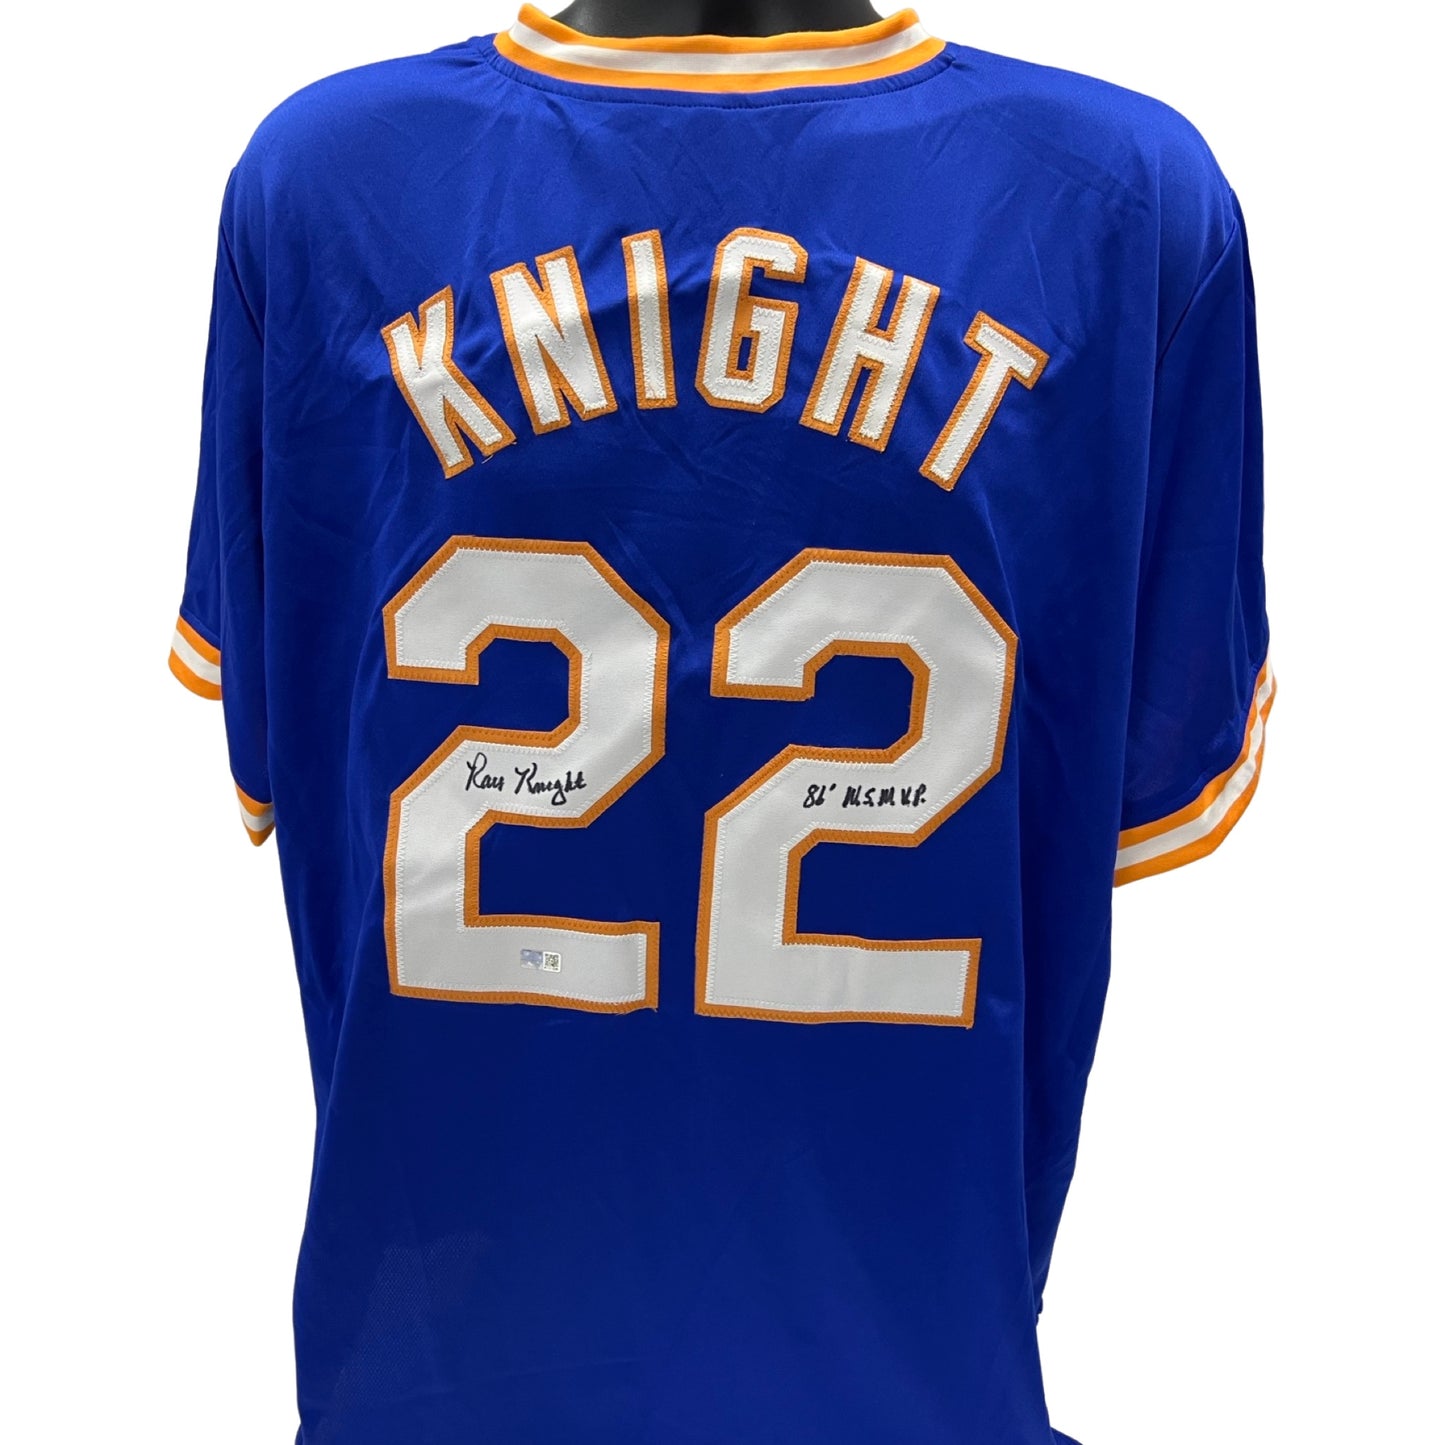 Ray Knight Autographed New York Mets Blue Jersey “86 WS MVP” Inscription Steiner CX